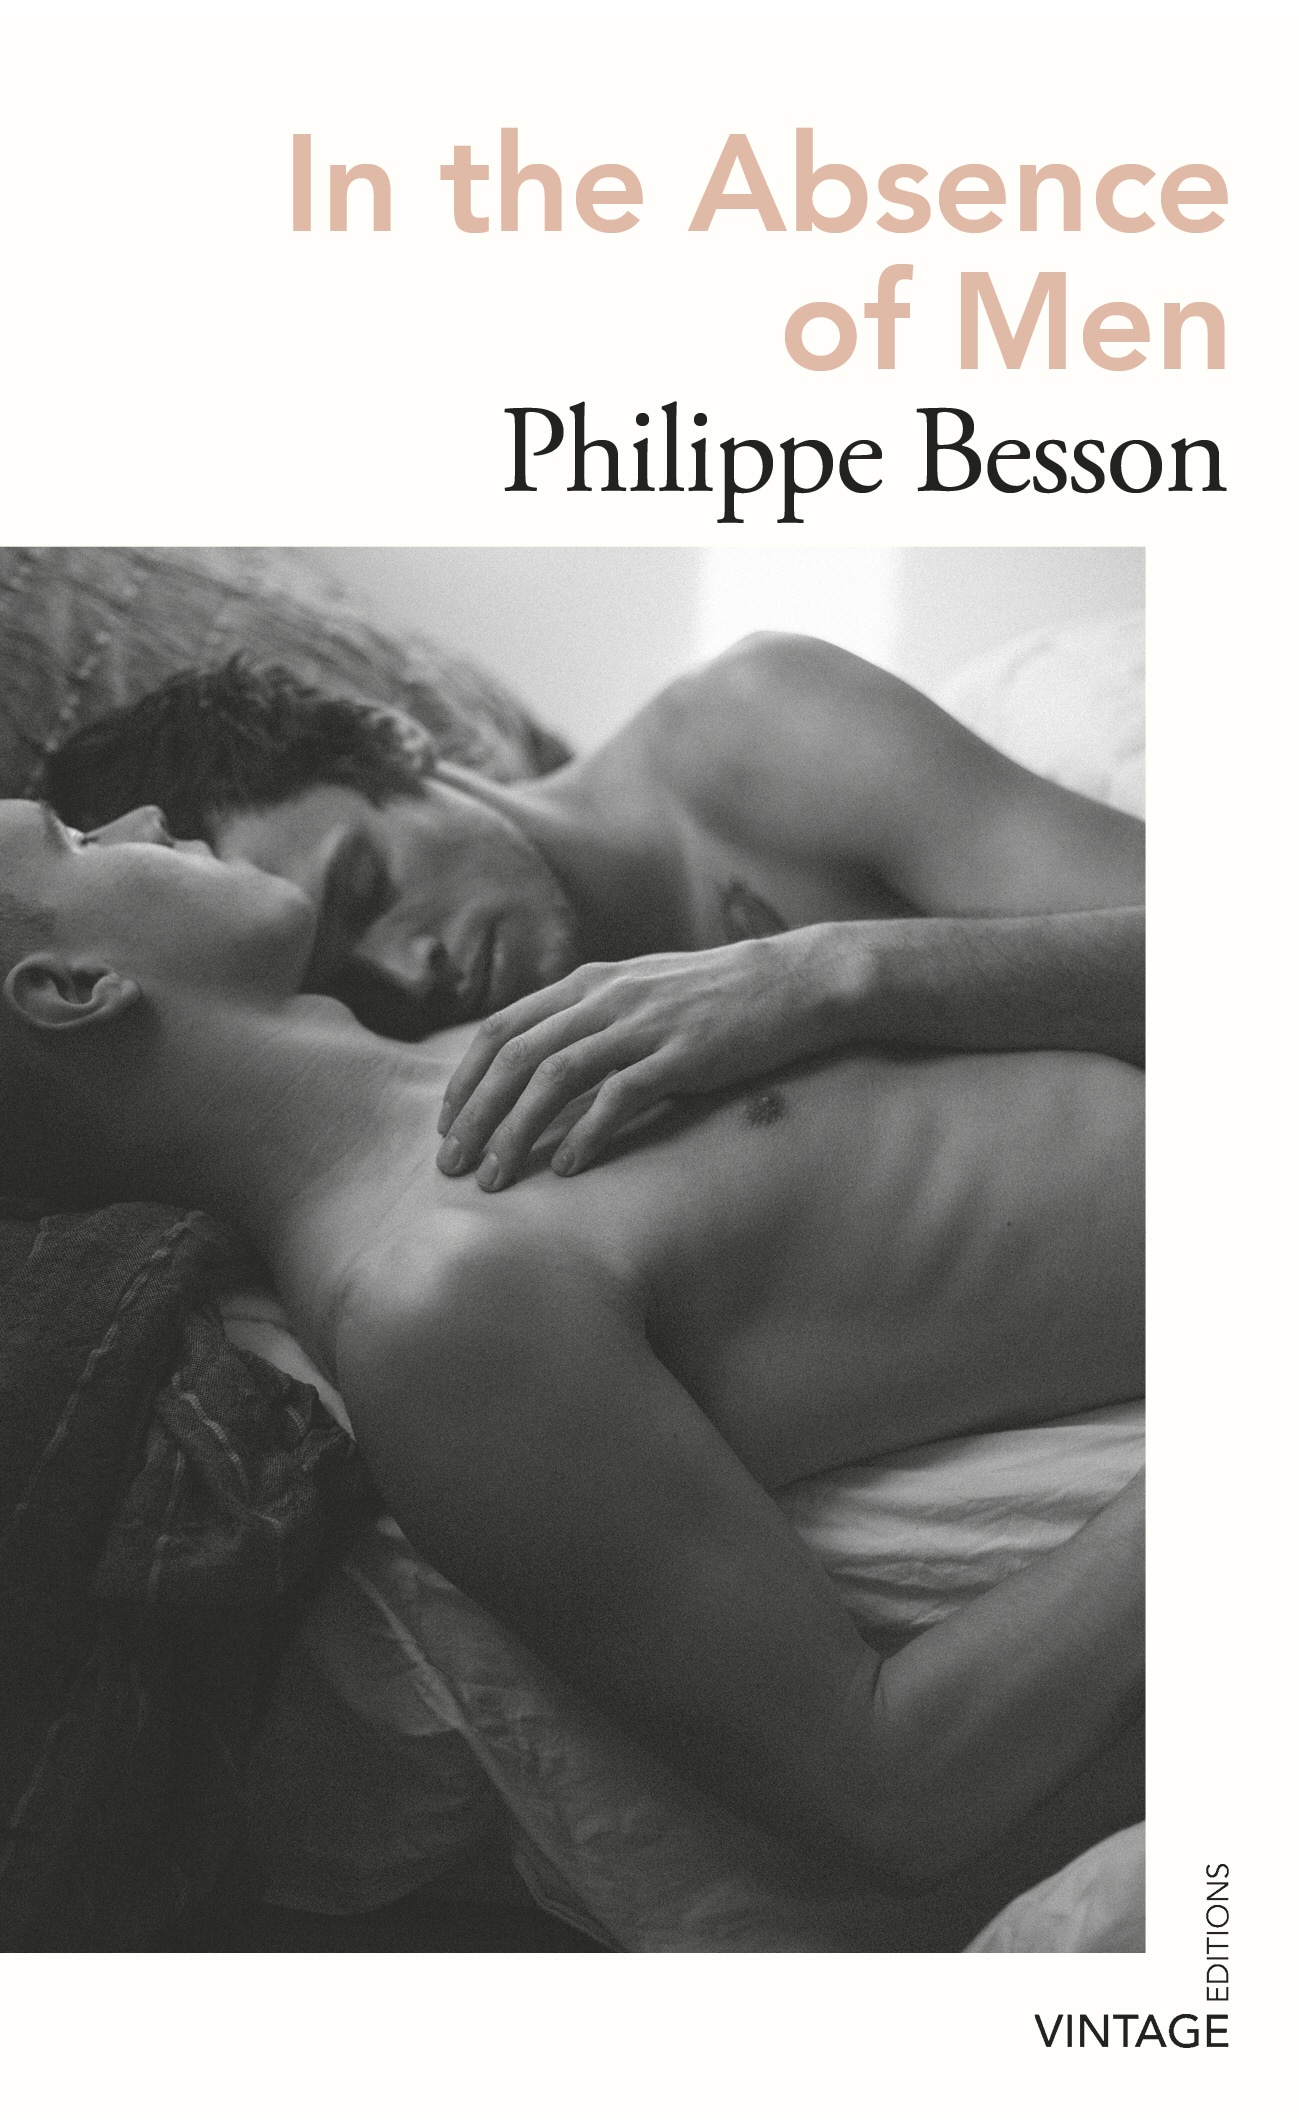 Book “In the Absence of Men” by Philippe Besson — September 3, 2020